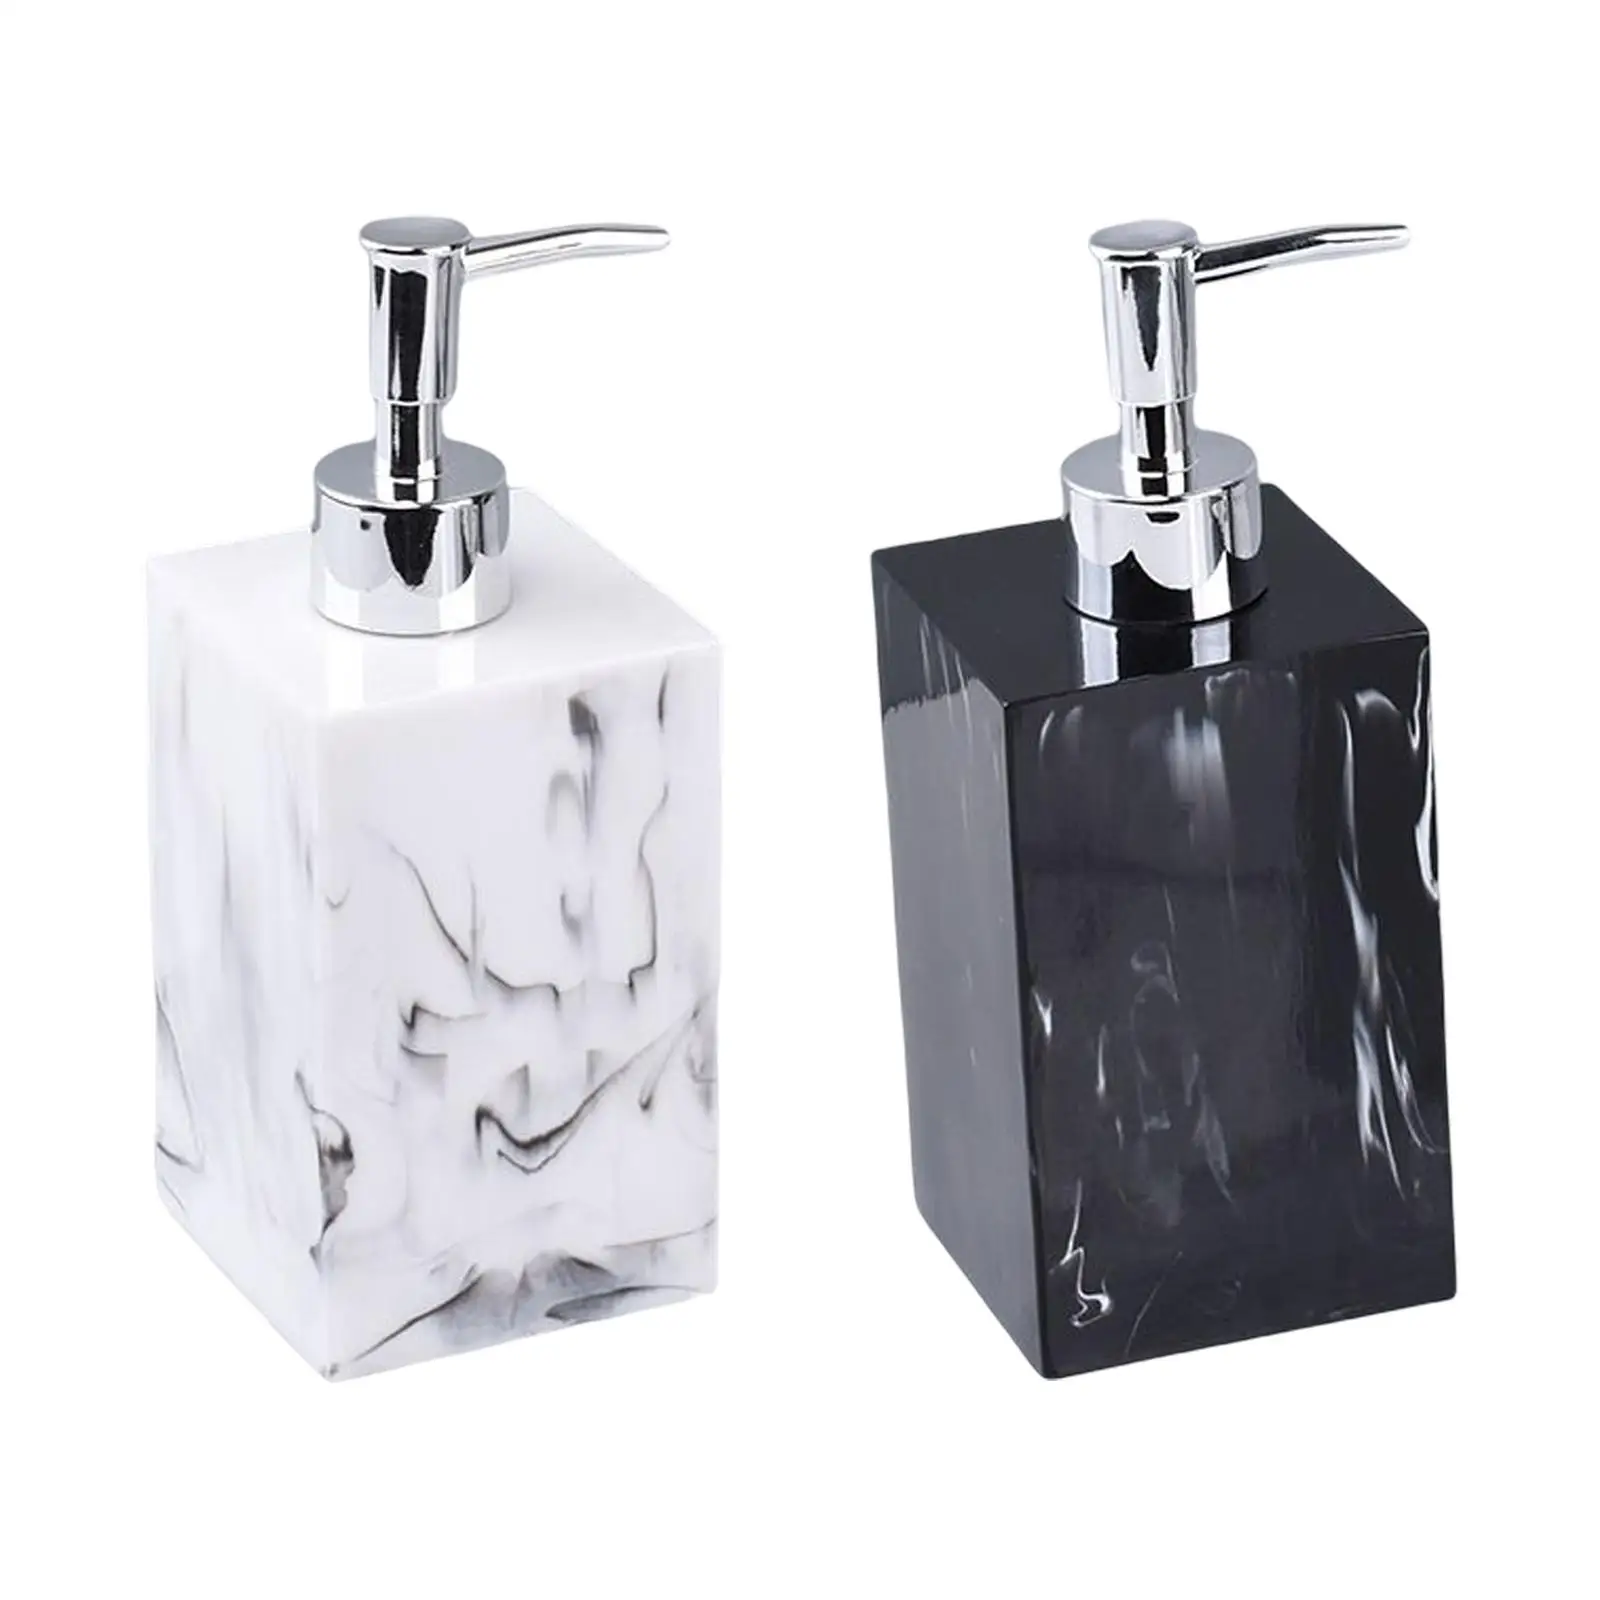 Empty Soap Dispenser Resin 500ml with Pump Refillable Container Bottle for Conditioner Hand Soap Bathroom Home